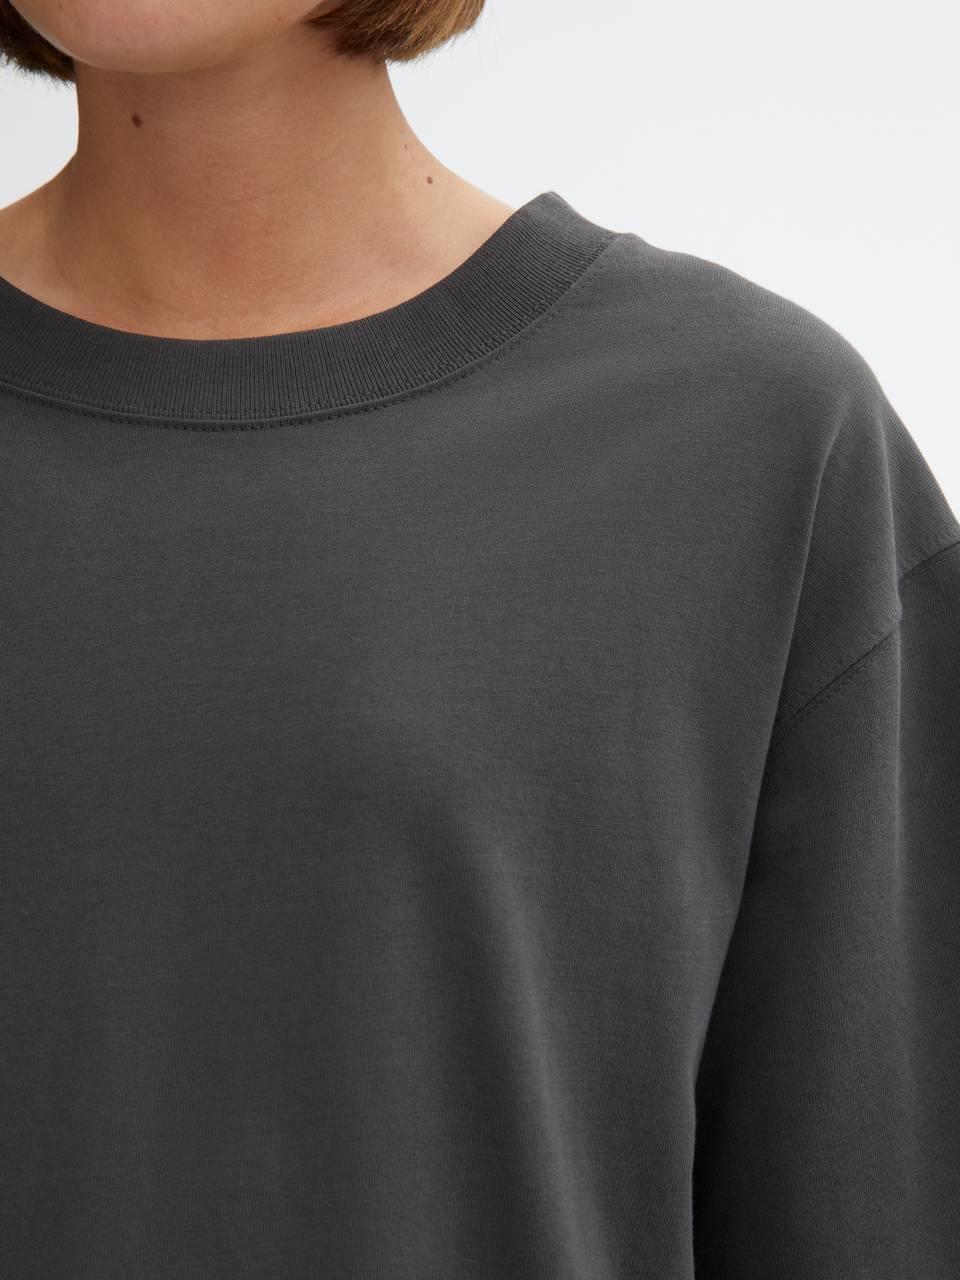 DAGMAR Oversized Cotton Tee in Washed Black